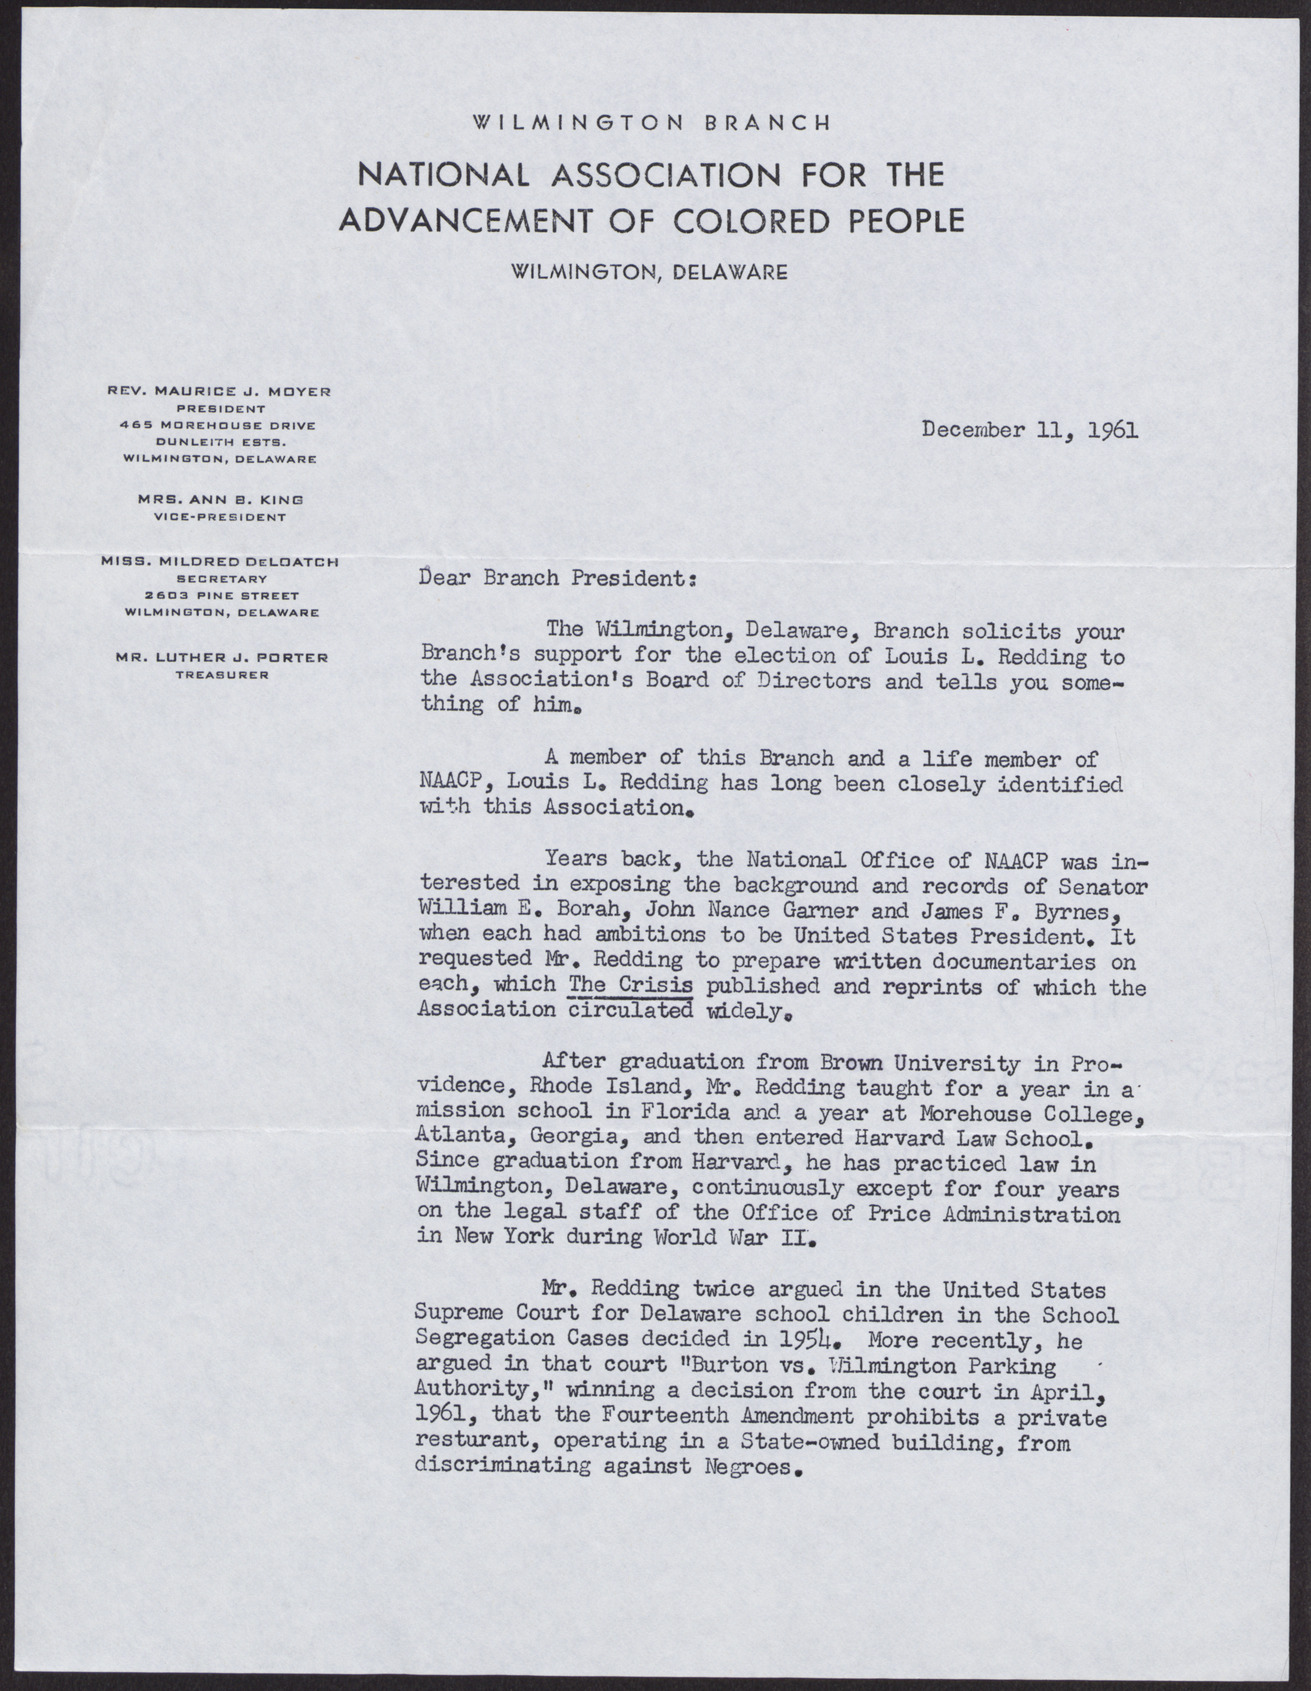 Letter to [unnamed] Branch President from the NAACP Wilmington, Delaware Branch, December 11, 1961